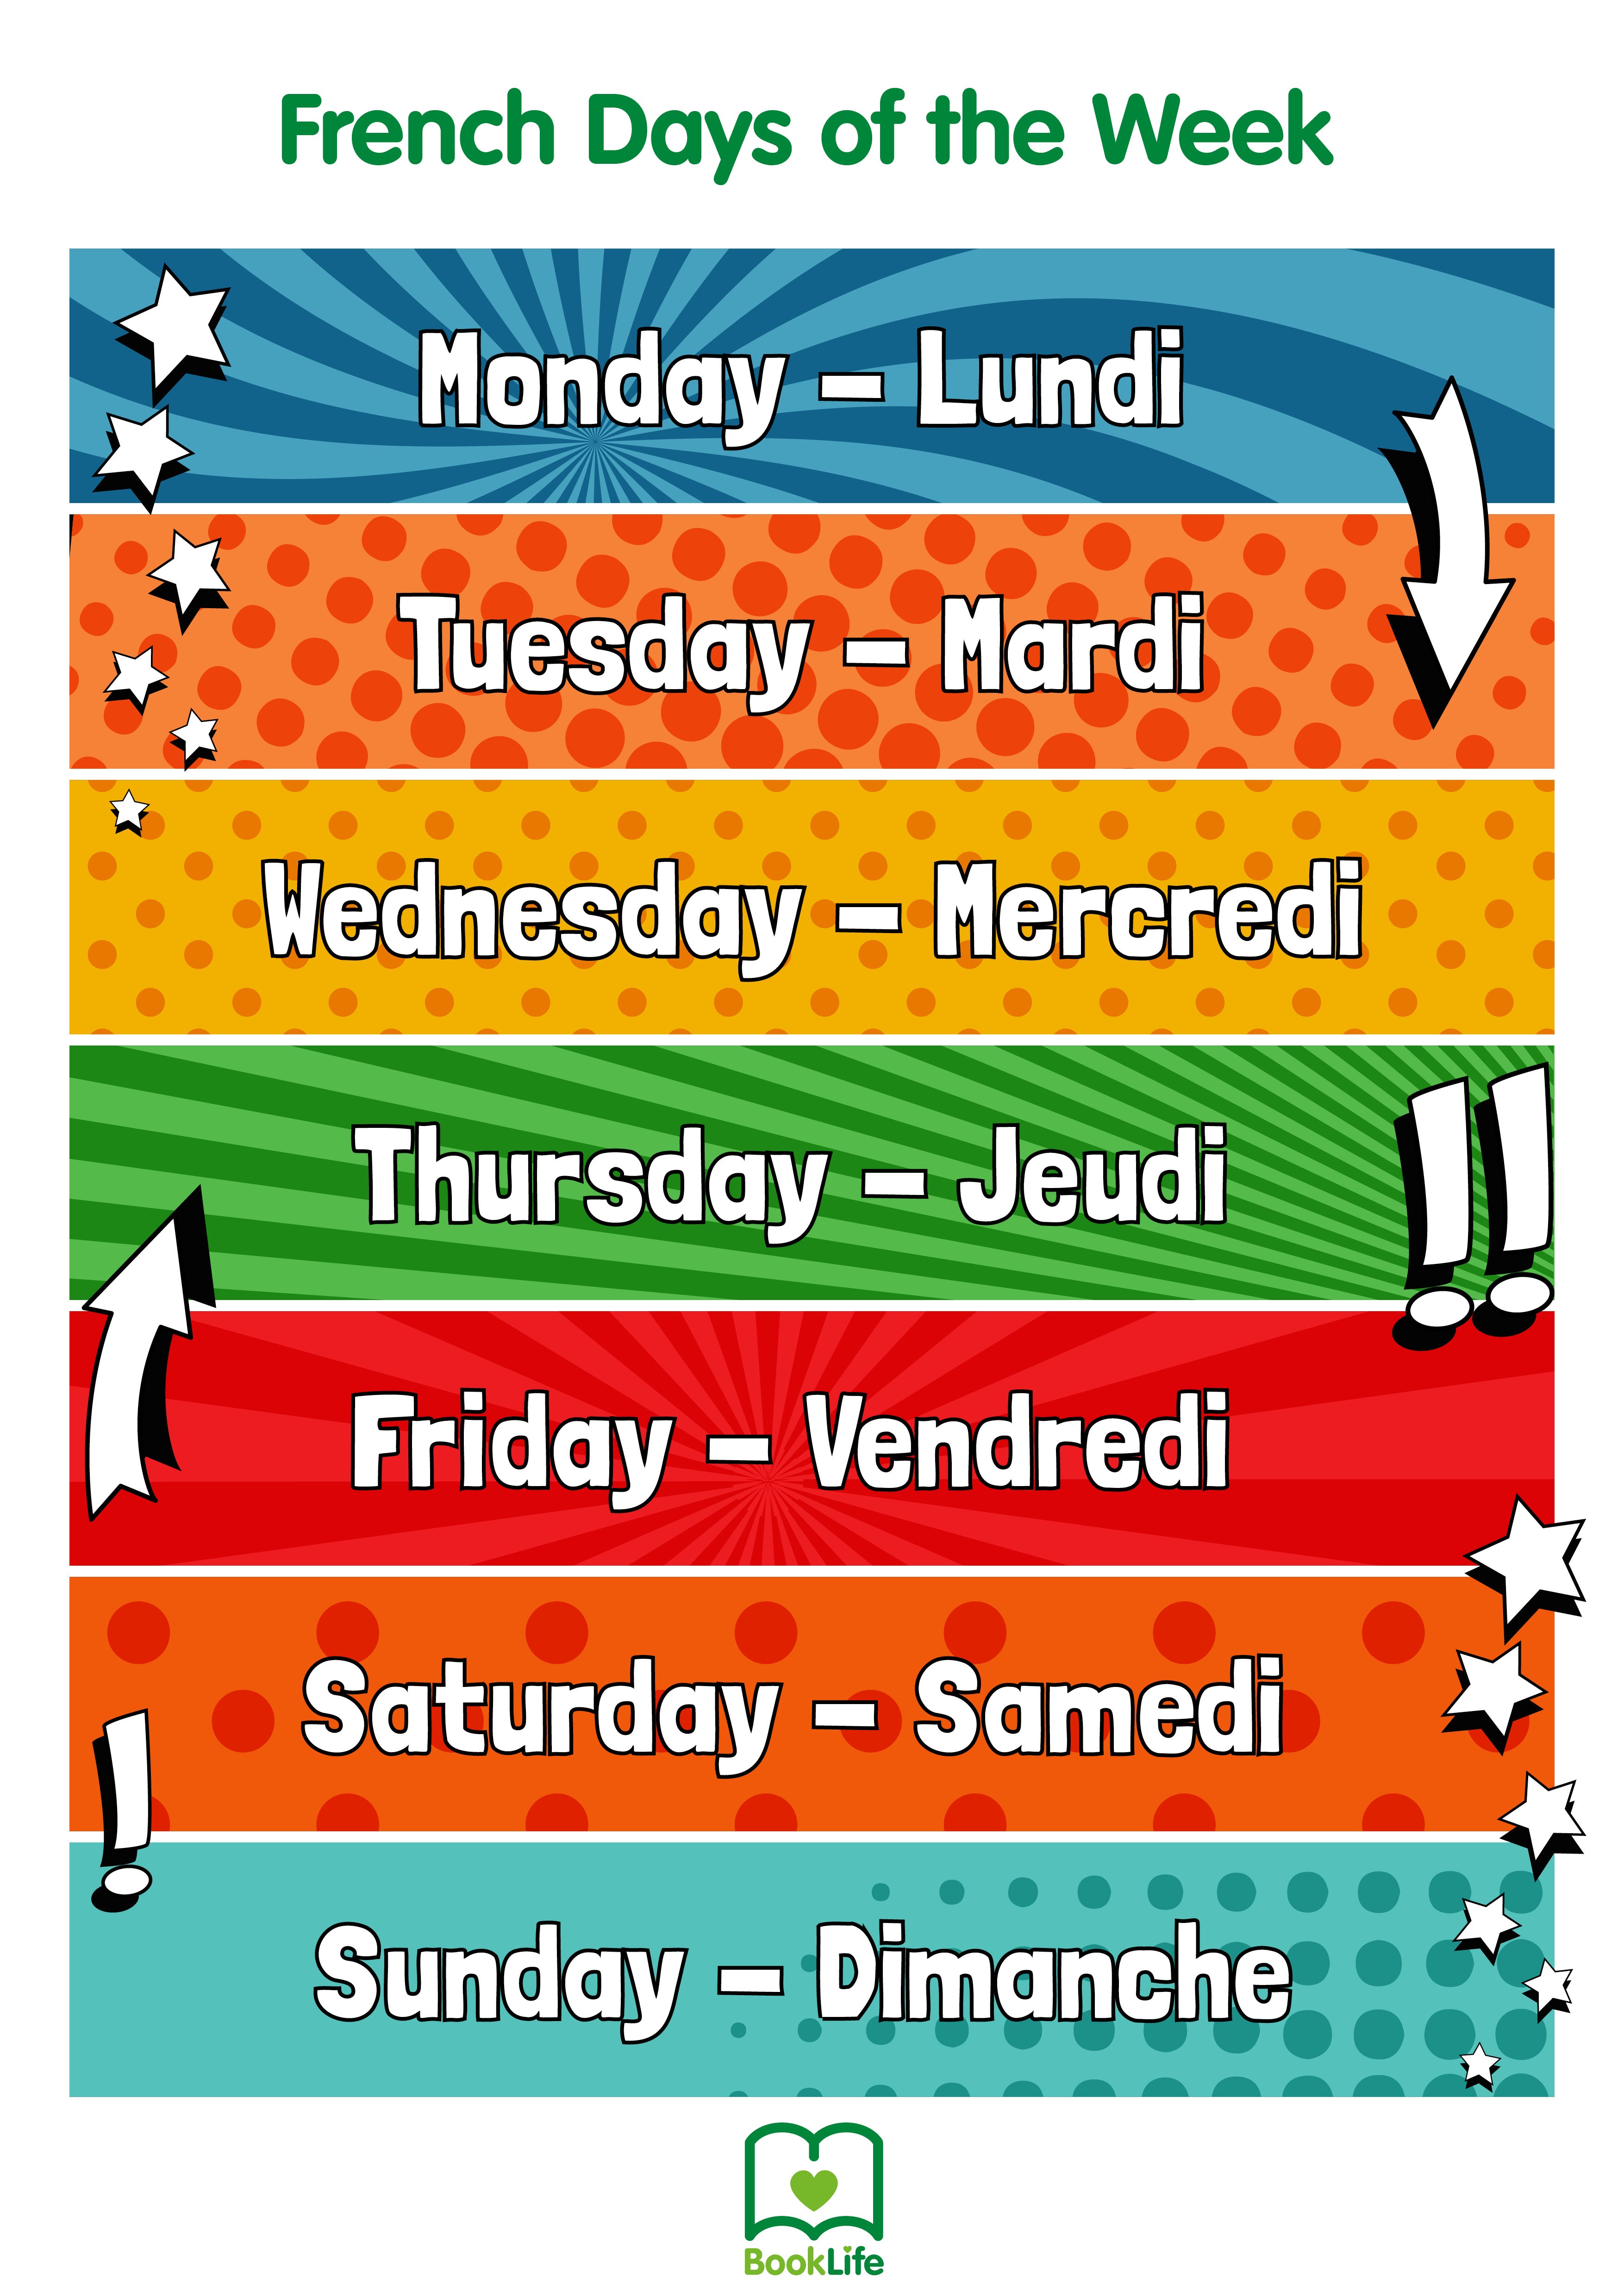 Free French Days of the Week Poster by BookLife